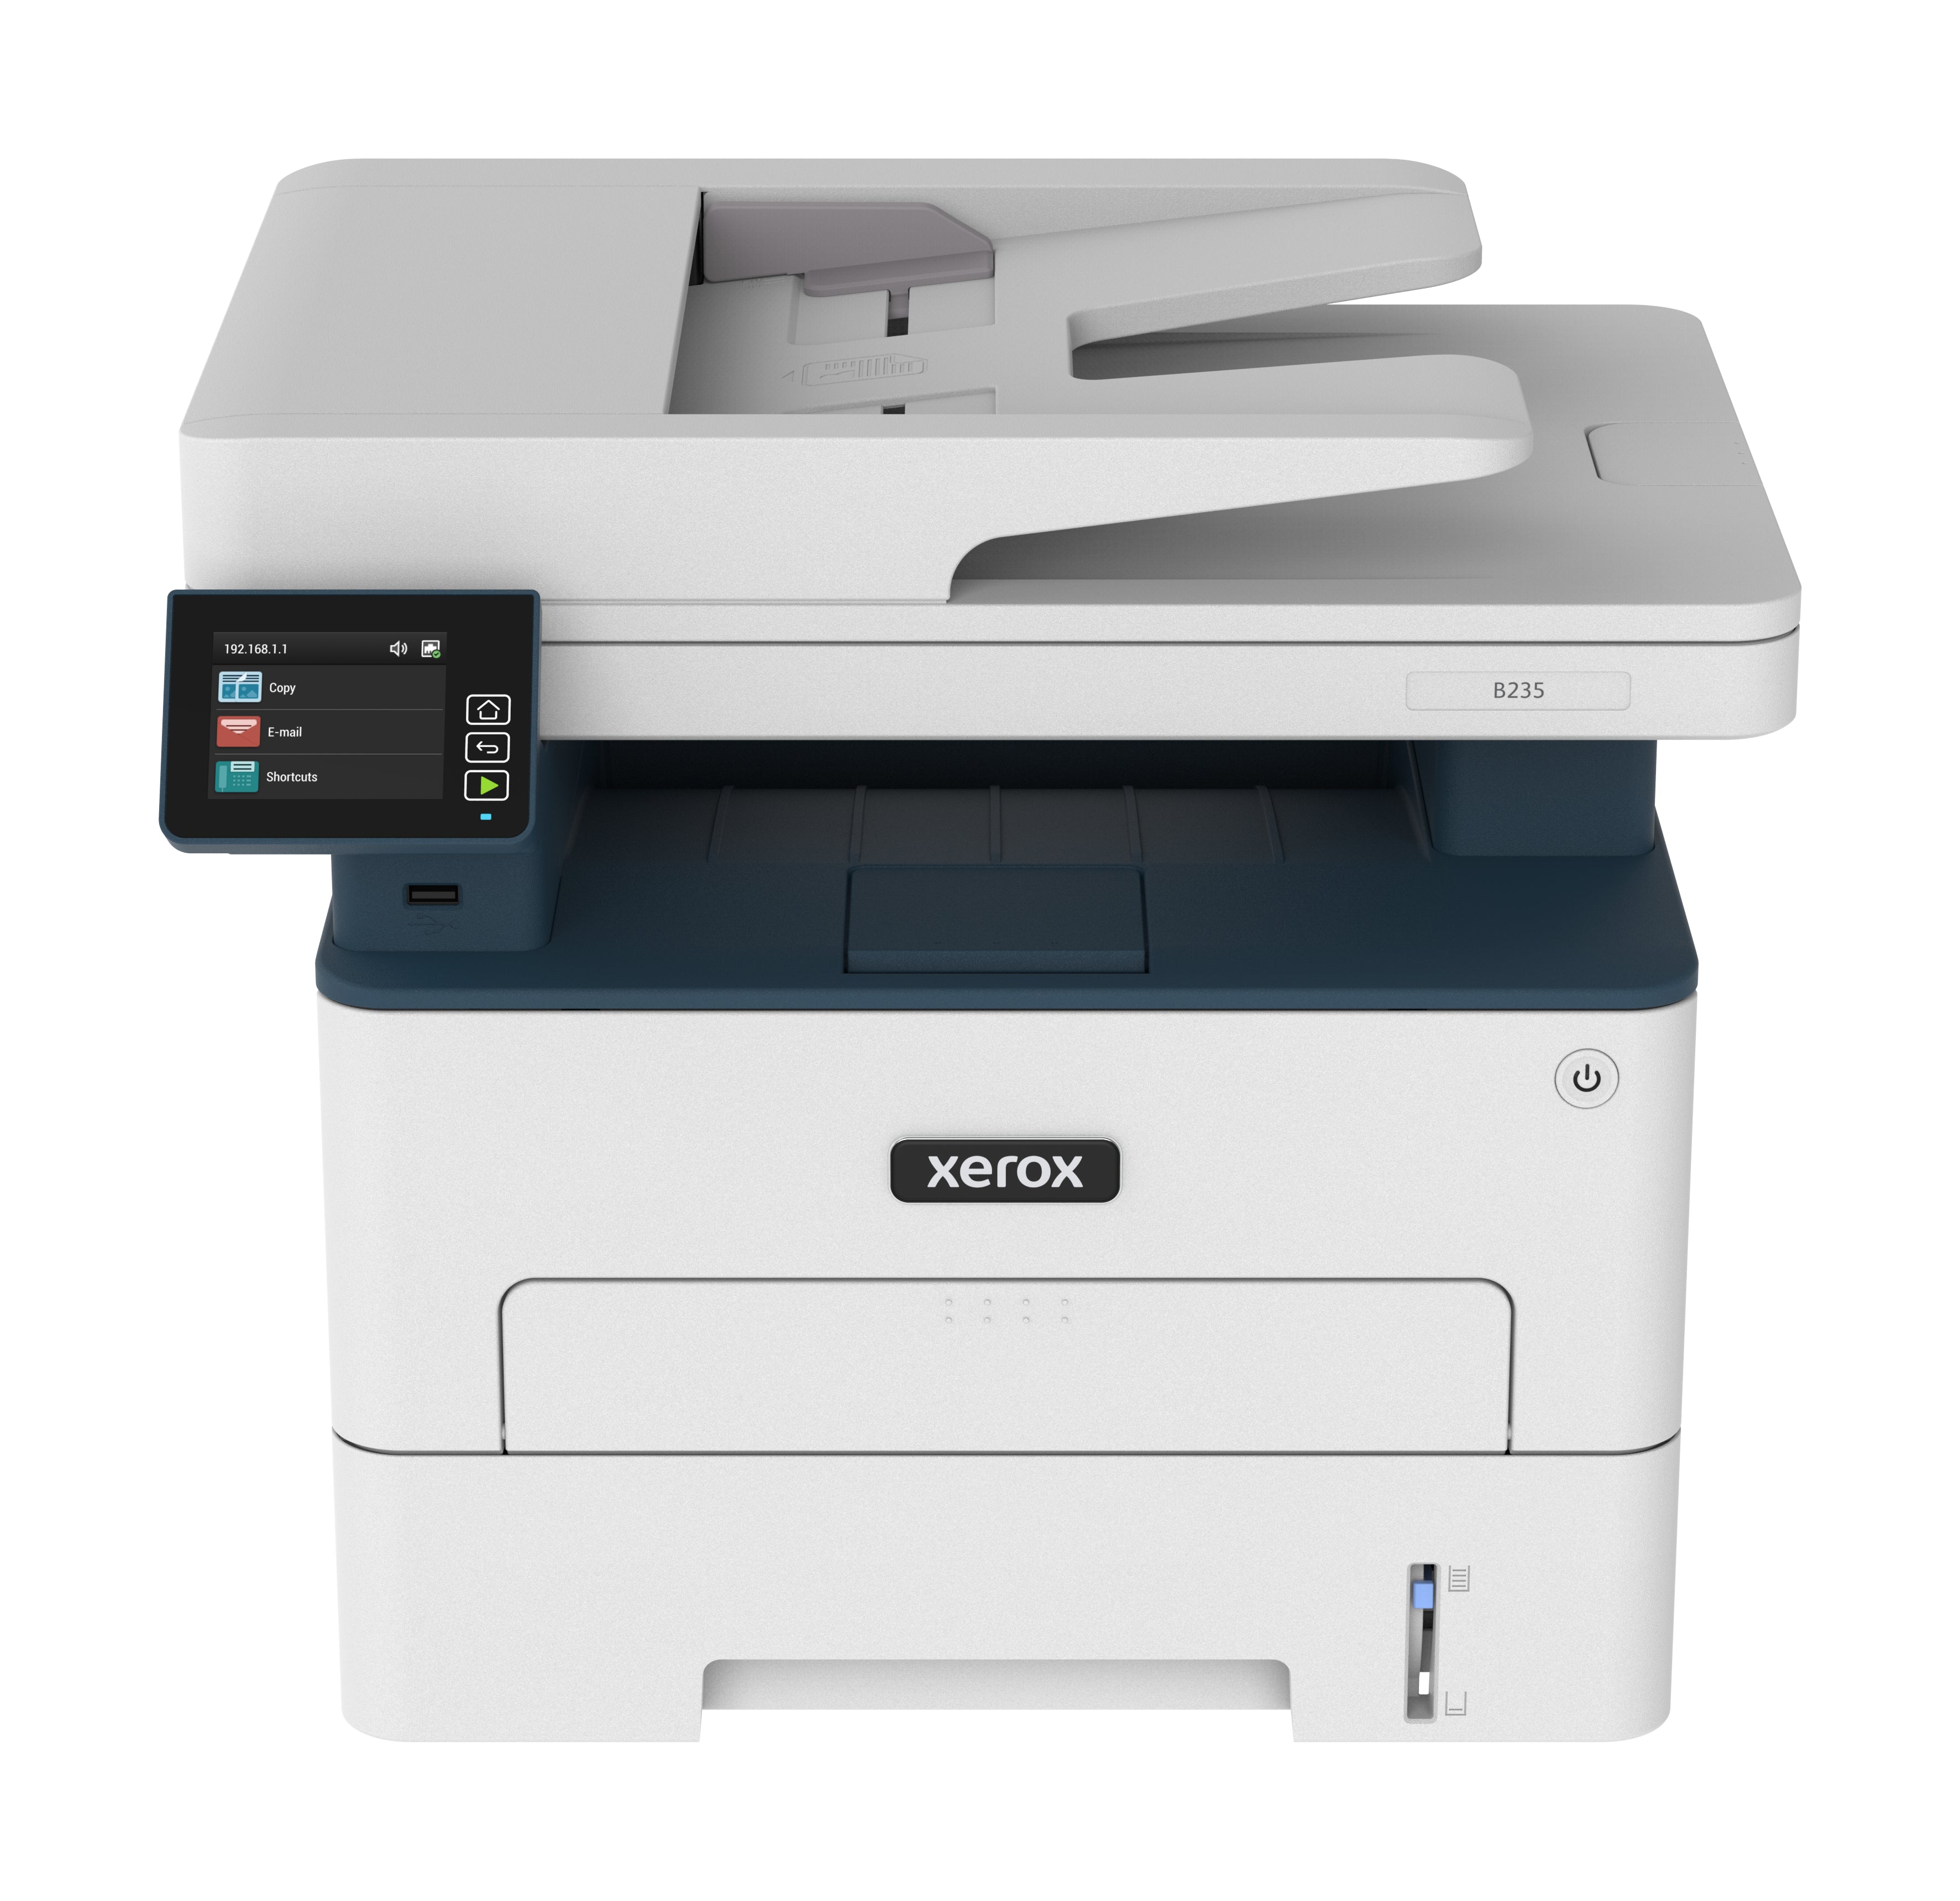 Absolute Toner $395/Month Xerox B235 (B235/DNI) Wireless Monochrome All-In-One Printer, Print/Scan/Copy/Fax - Easy To Use Black And White Laser Printer Showroom Monochrome Copiers